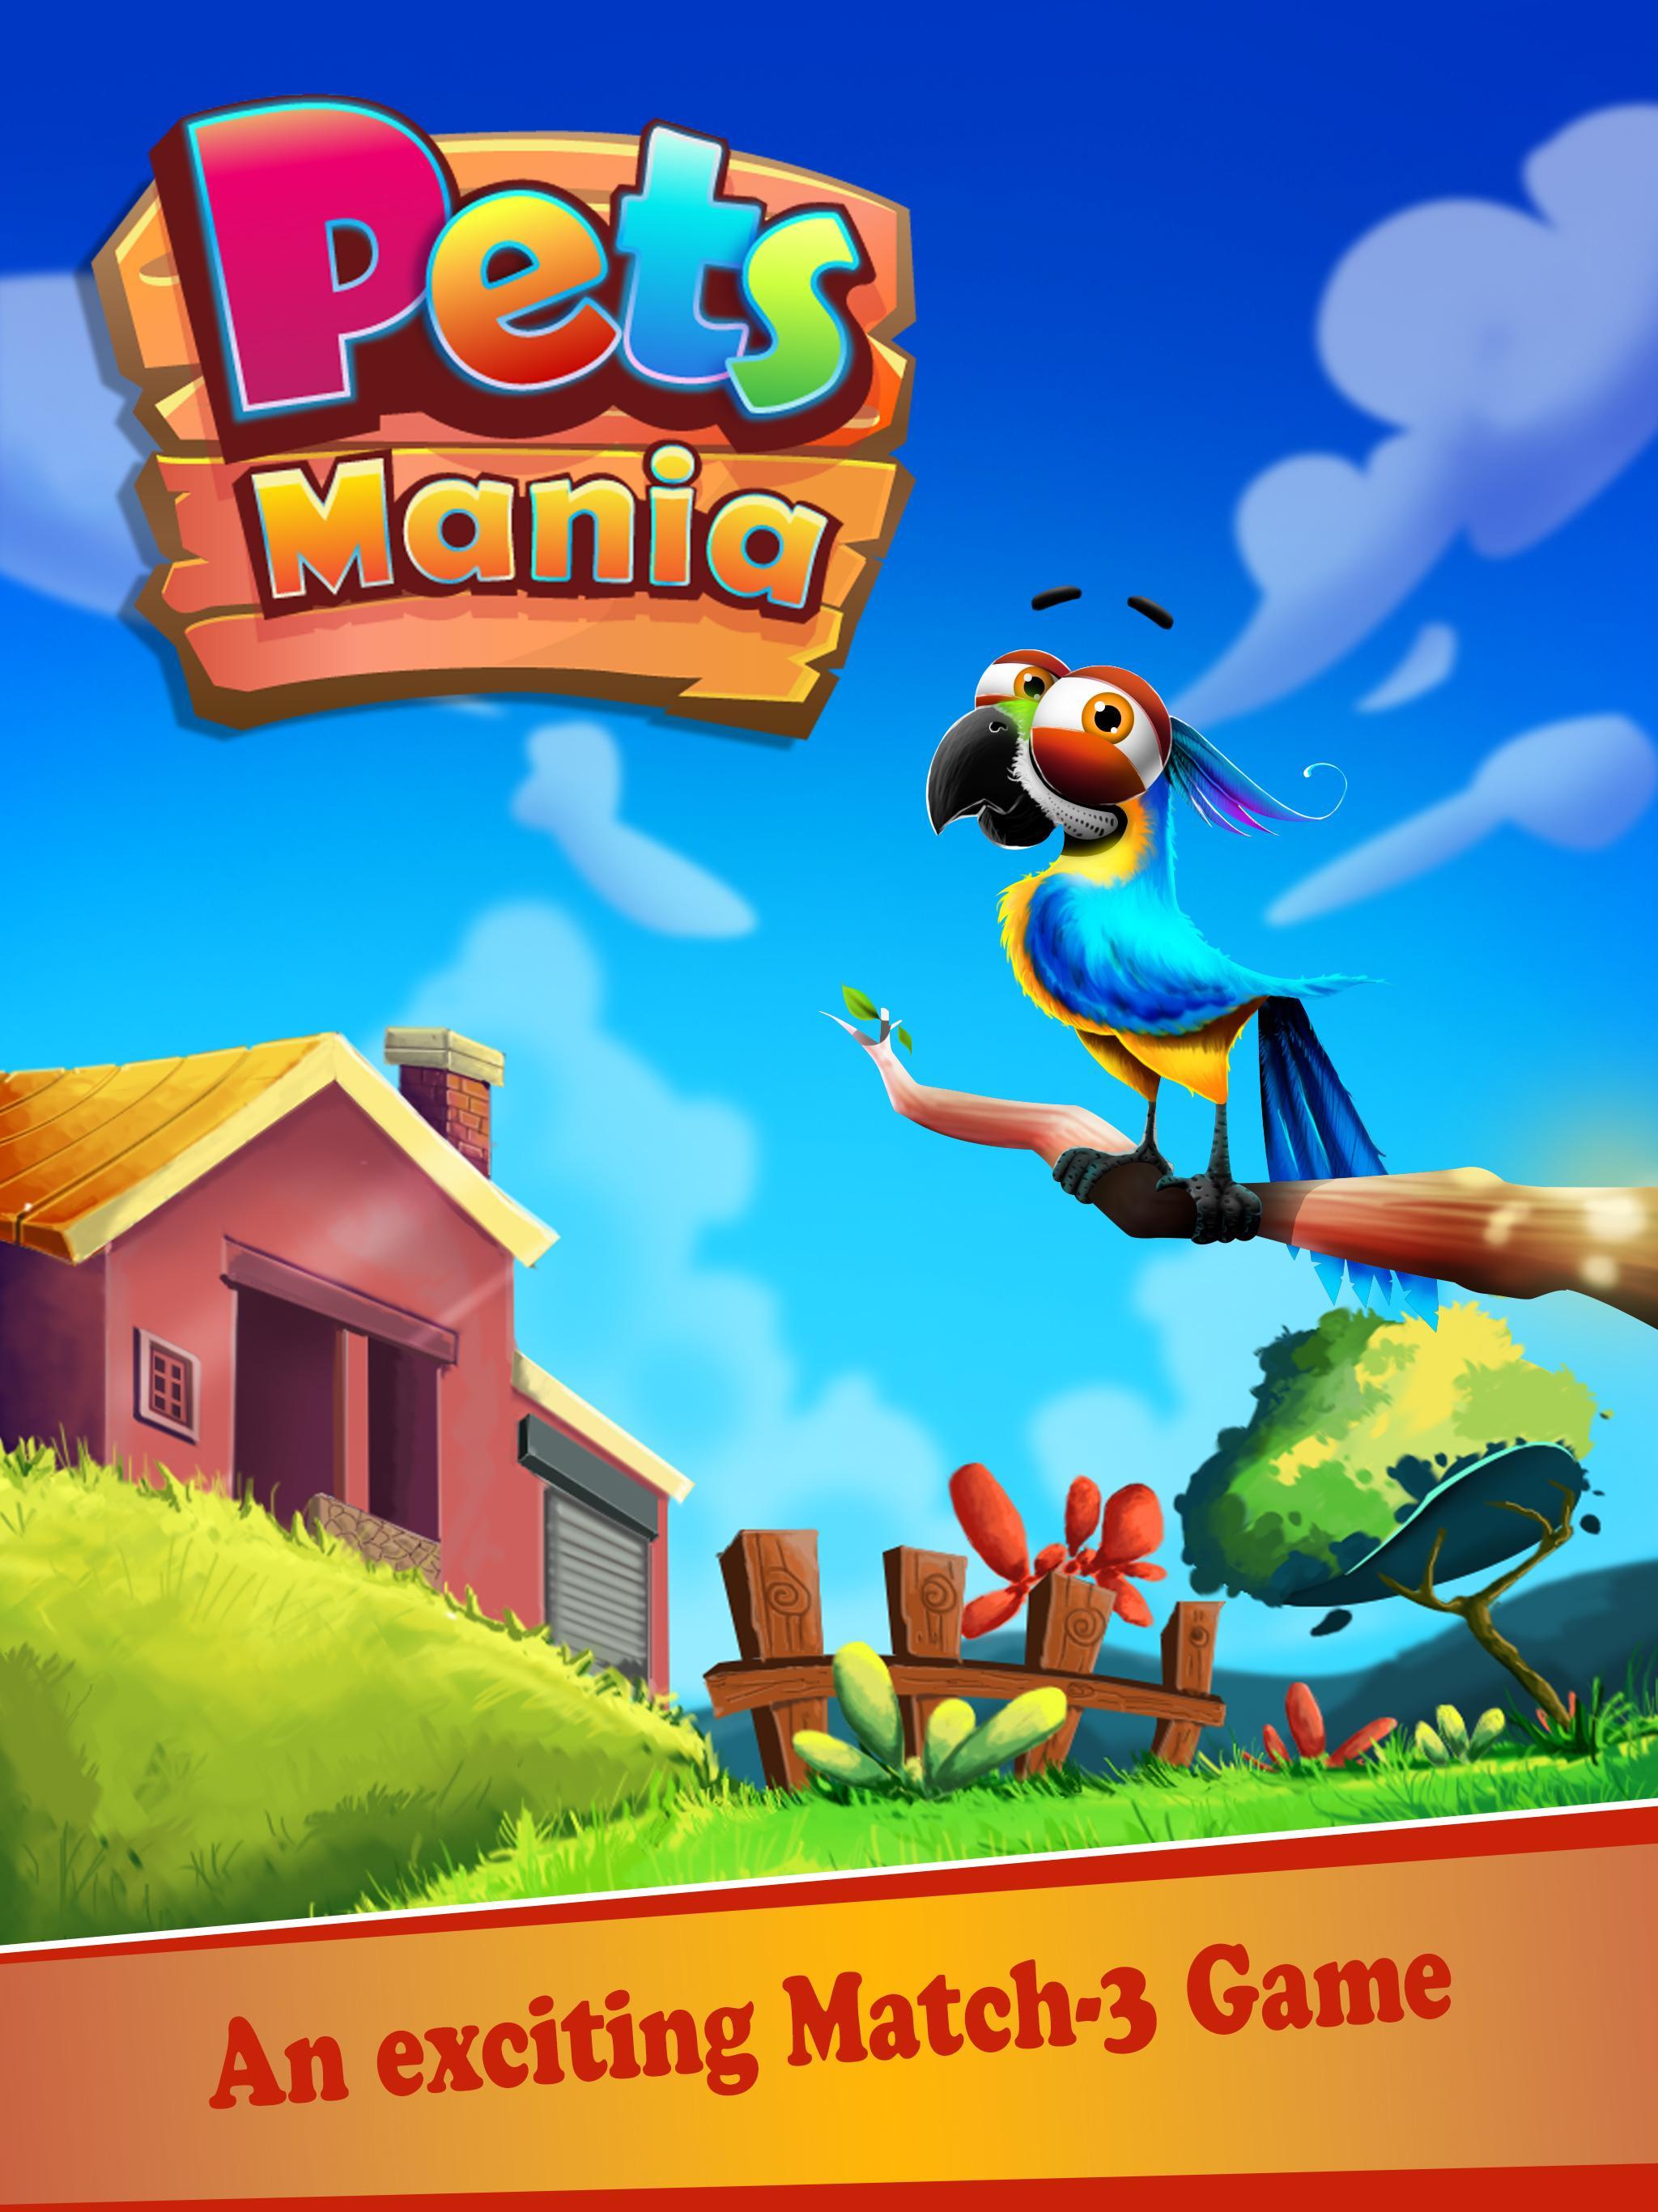 Pets Mania Match 3 Game Free For Android Apk Download - pet mania roblox